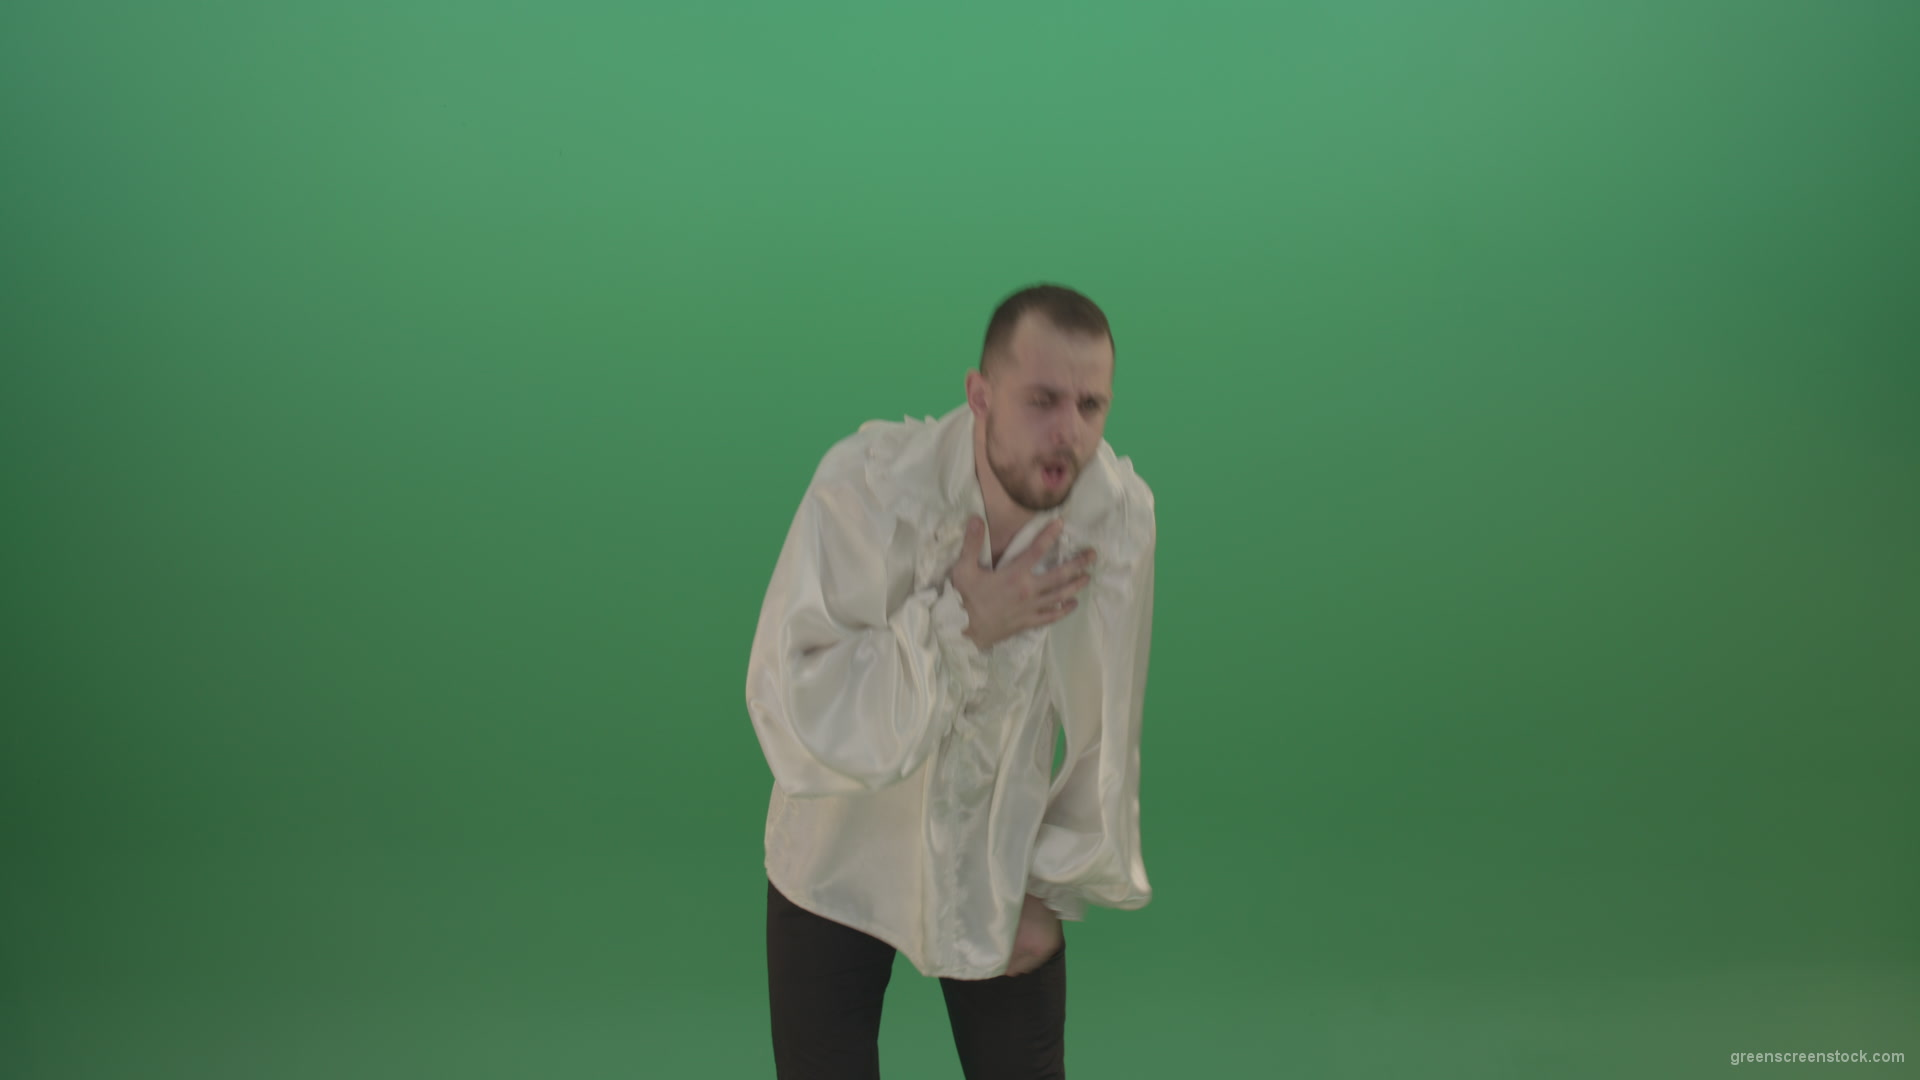 Man-is-very-coughing-infected-with-a-virus-isolated-on-chromakey-background_006 Green Screen Stock